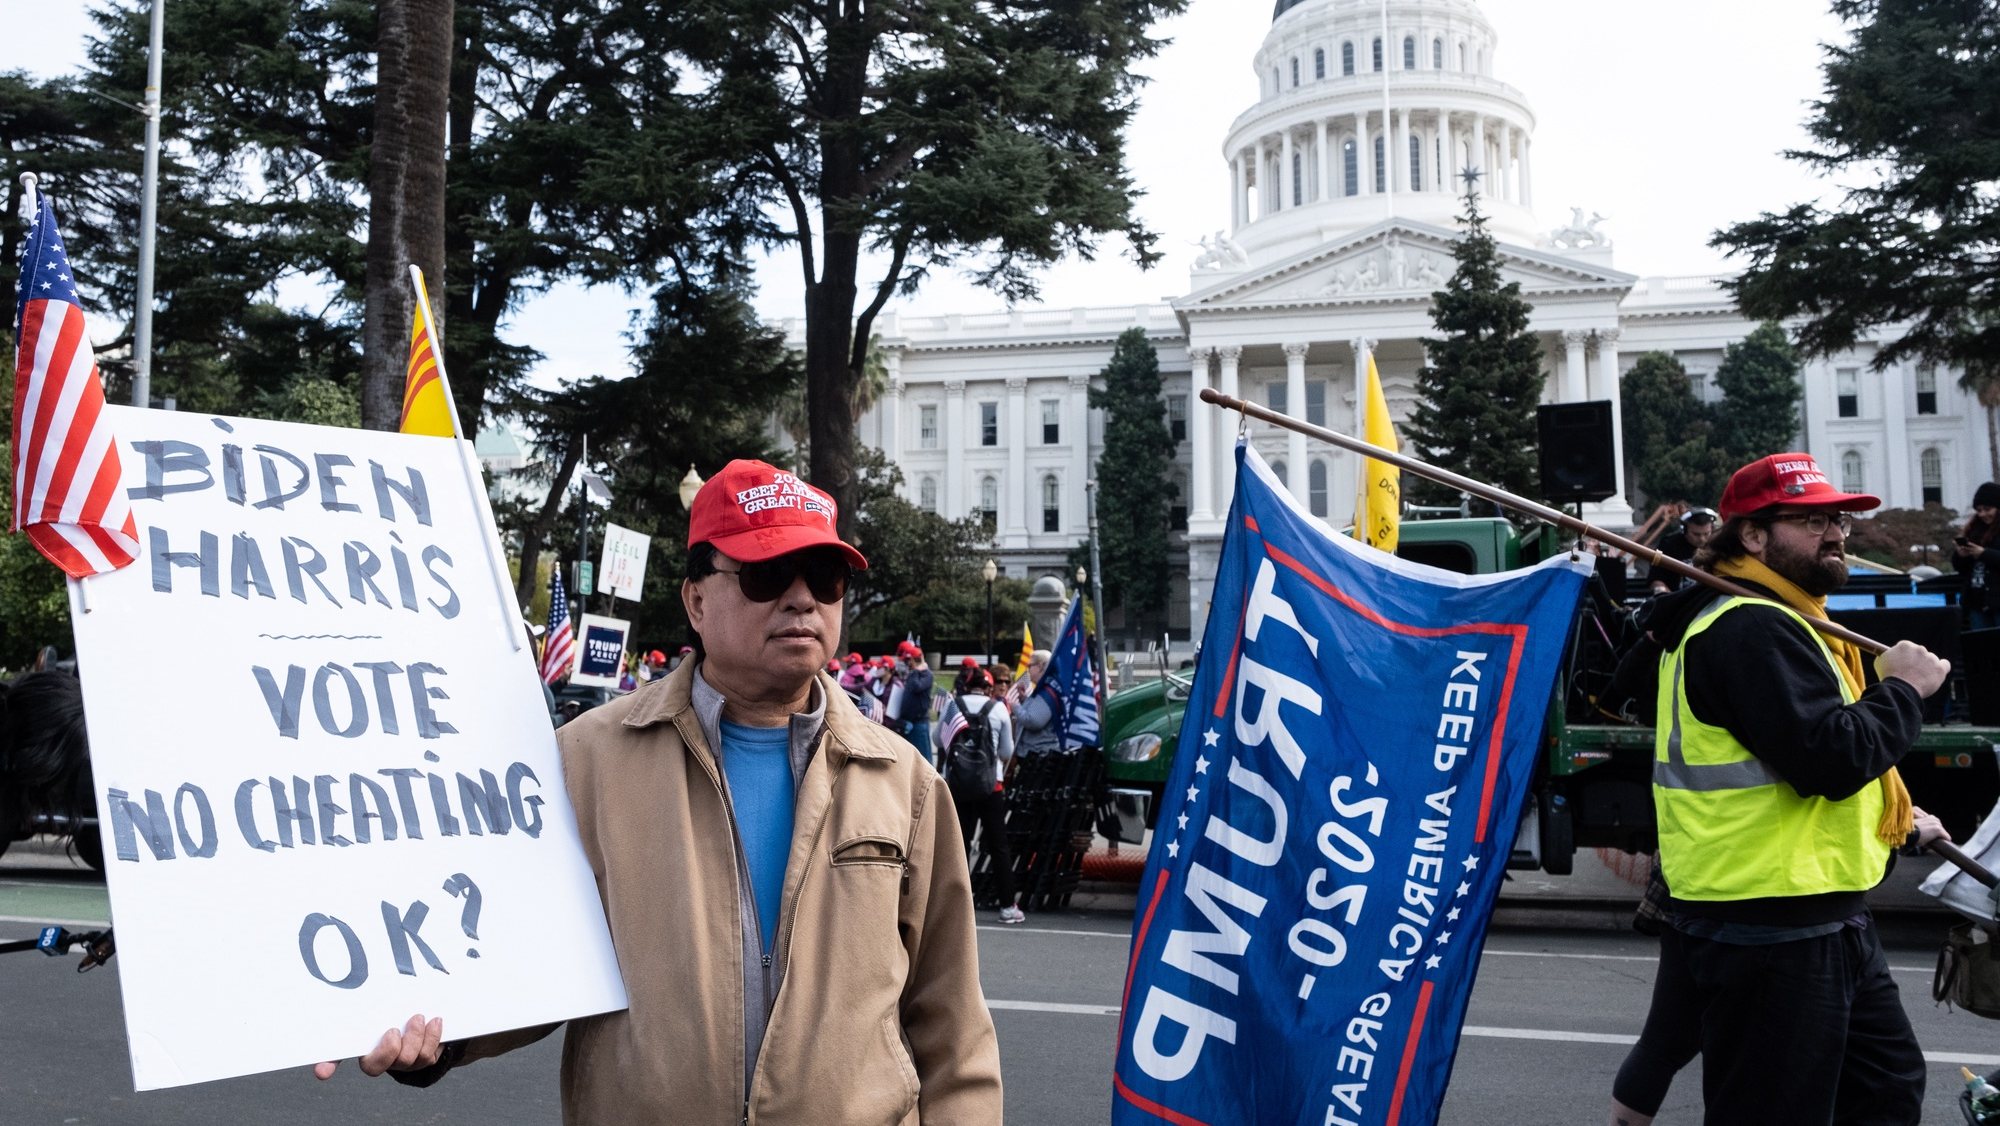 epa08821049 Supporters of US President Donald J. Trump rally at the state capitol in Sacramento, California, USA, 14 November 2020. US President Donald J. Trump has refused to concede the 2020 Presidential election to his Democratic challenger President-Elect Joe Biden.  EPA/DAVID ODISHO